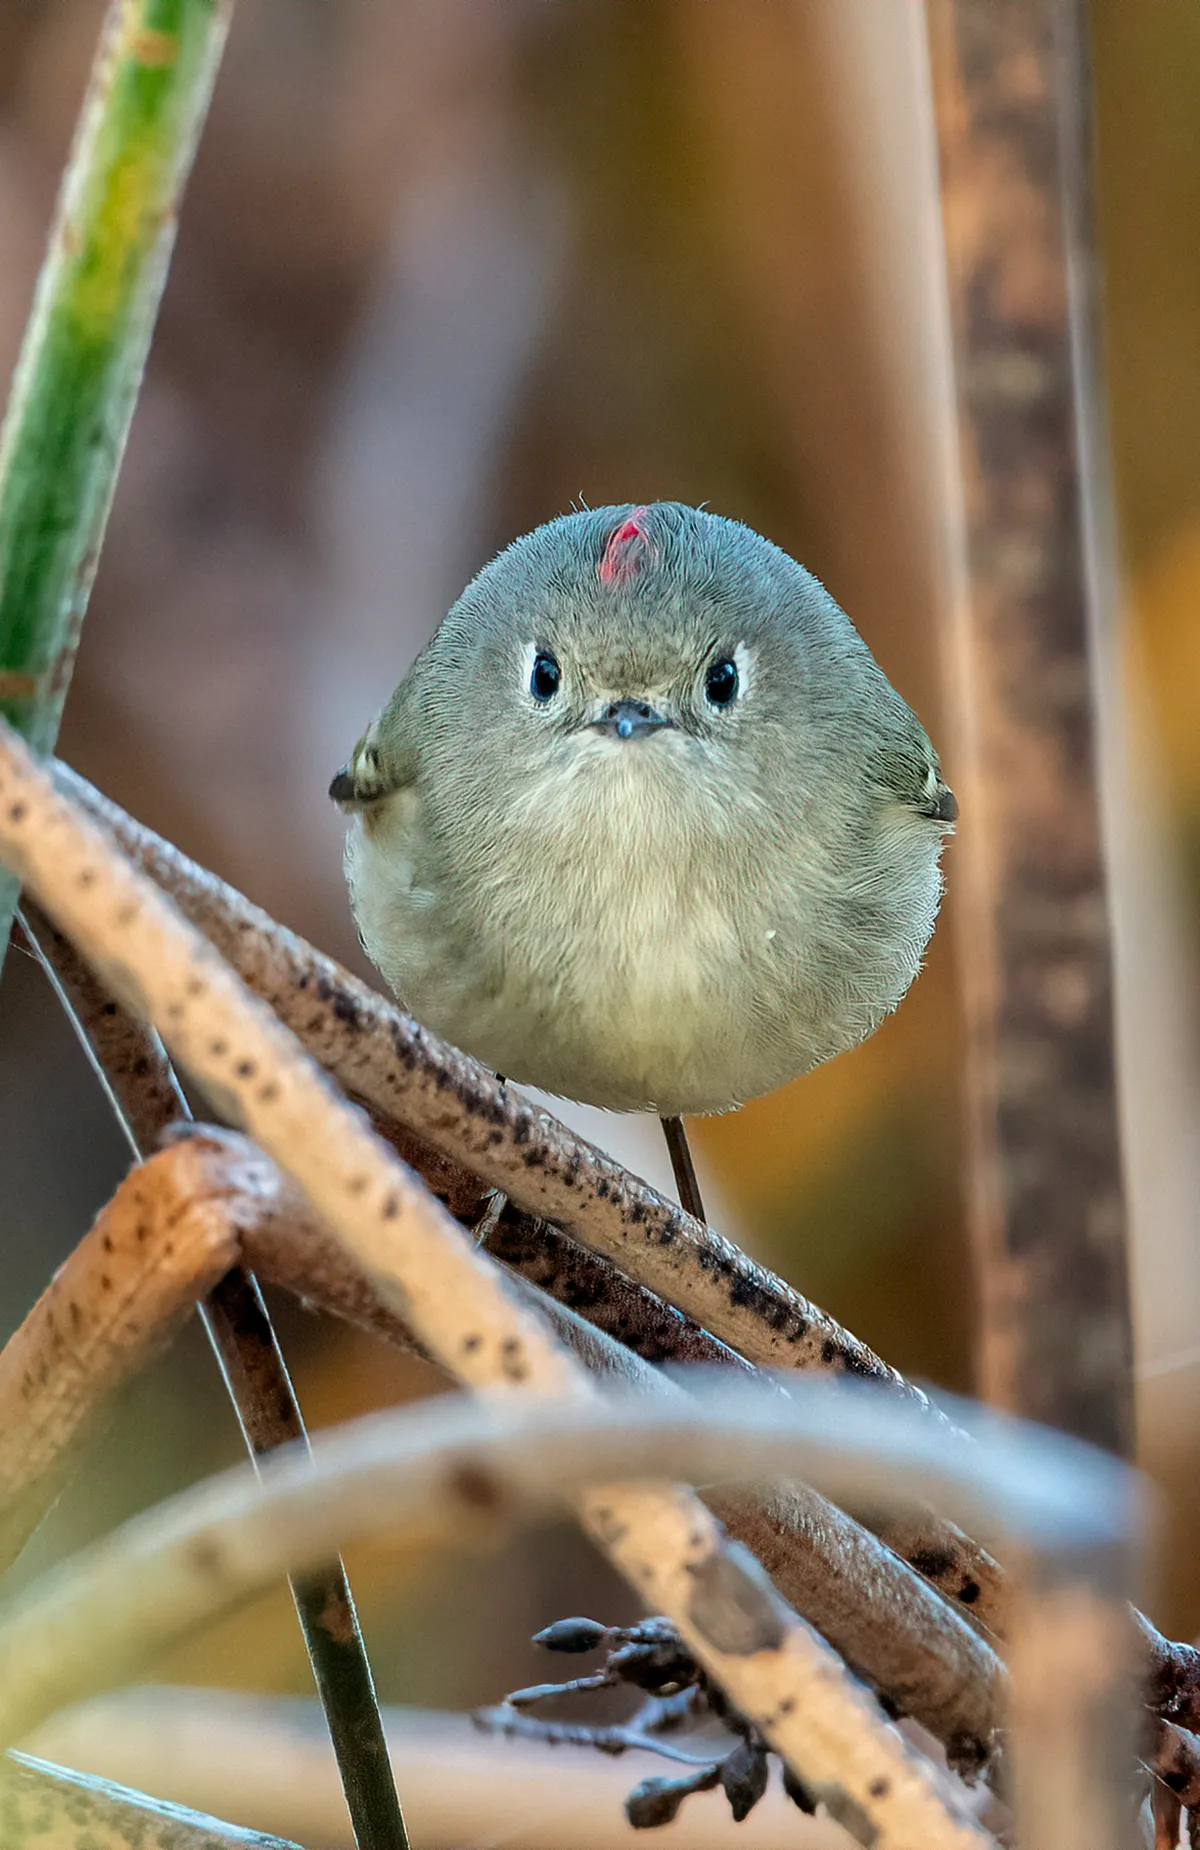 The Comedy Wildlife Photography Awards 2021 Patrick Dirlam Dewey United States Title: Did I say you could take my picture? Description: I followed this Ruby-Crowned Kinglet for about 15 minutes as it hopped from one branch to another in fast succession. I think it knew I was following it because, all of a sudden, it just stopped and stared at me for all of about 3 seconds! Animal: Ruby-crowned Kinglet Location of shot: Atascadero, California